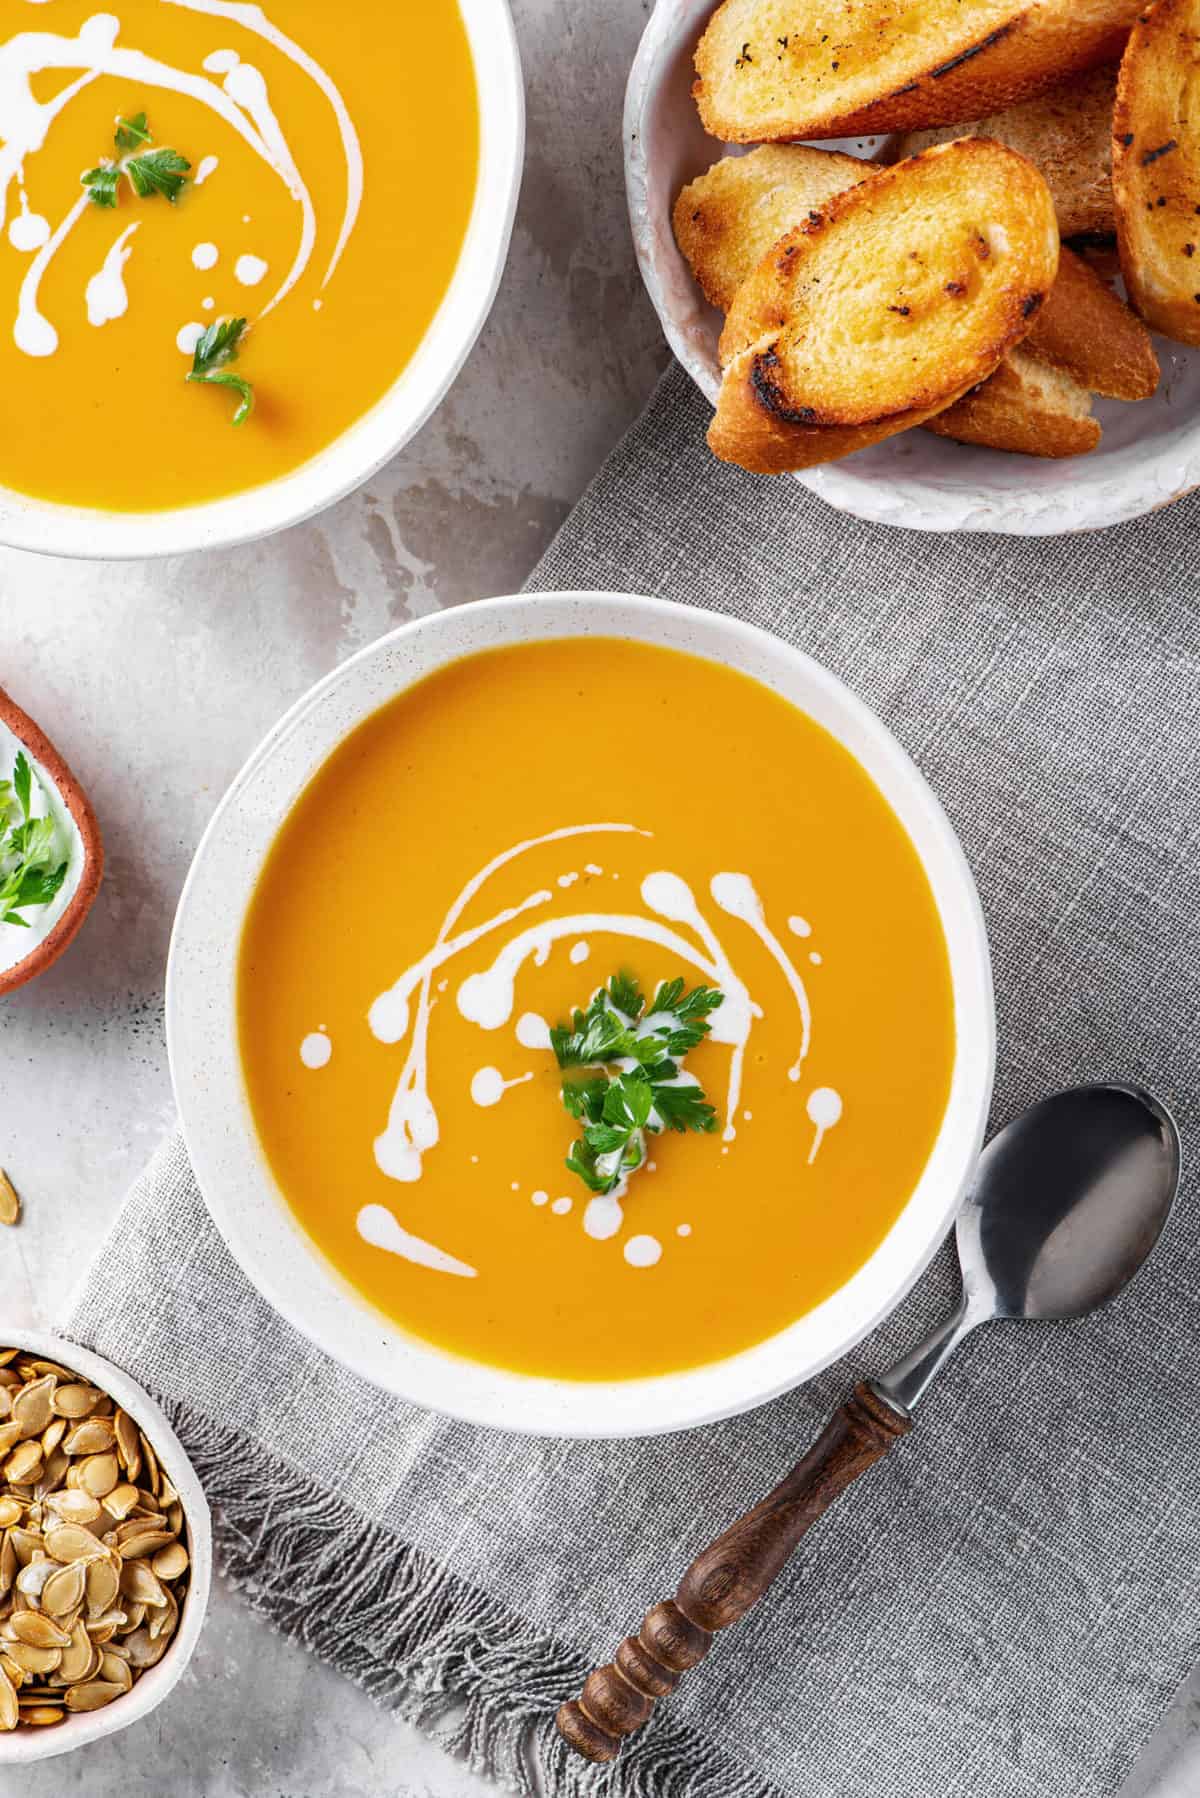 butternut squash soup with a sour cream swirl design and cilantro served in a white bowl and a silver spoon sitting next to the bowl